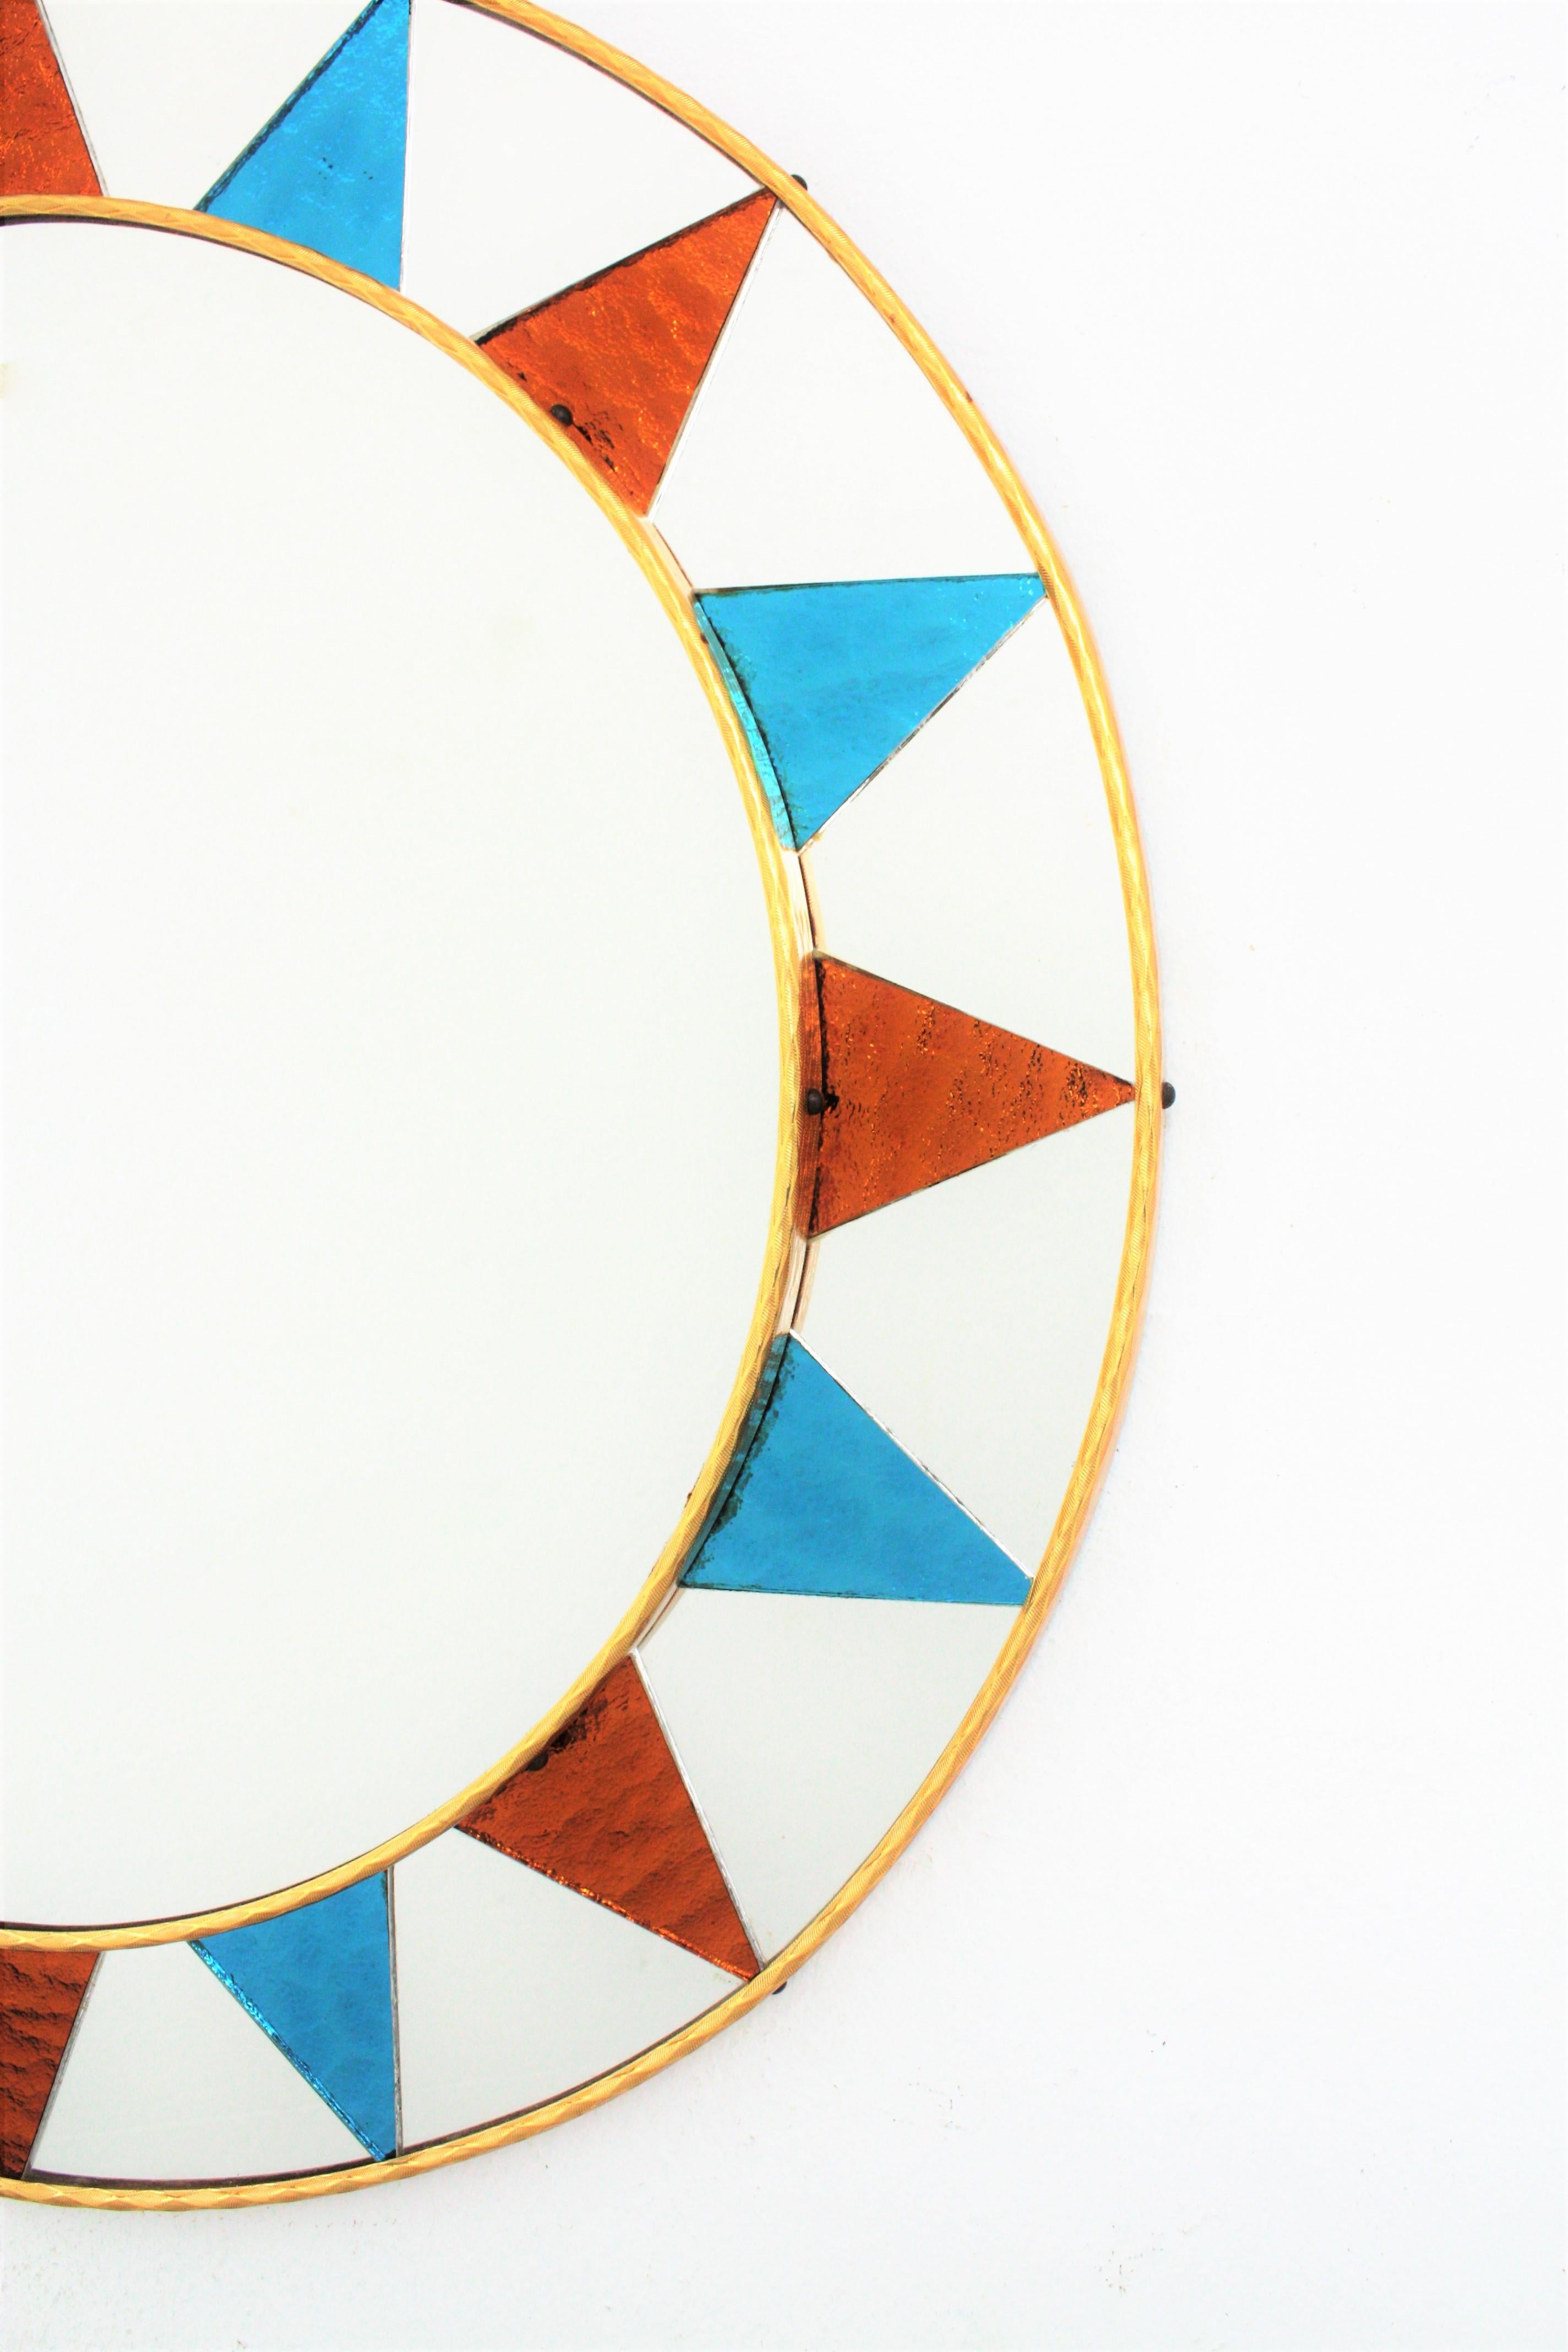 Silvered Sunburst Mirror with Mosaic Blue and Orange Glass Frame, Spain, 1960s